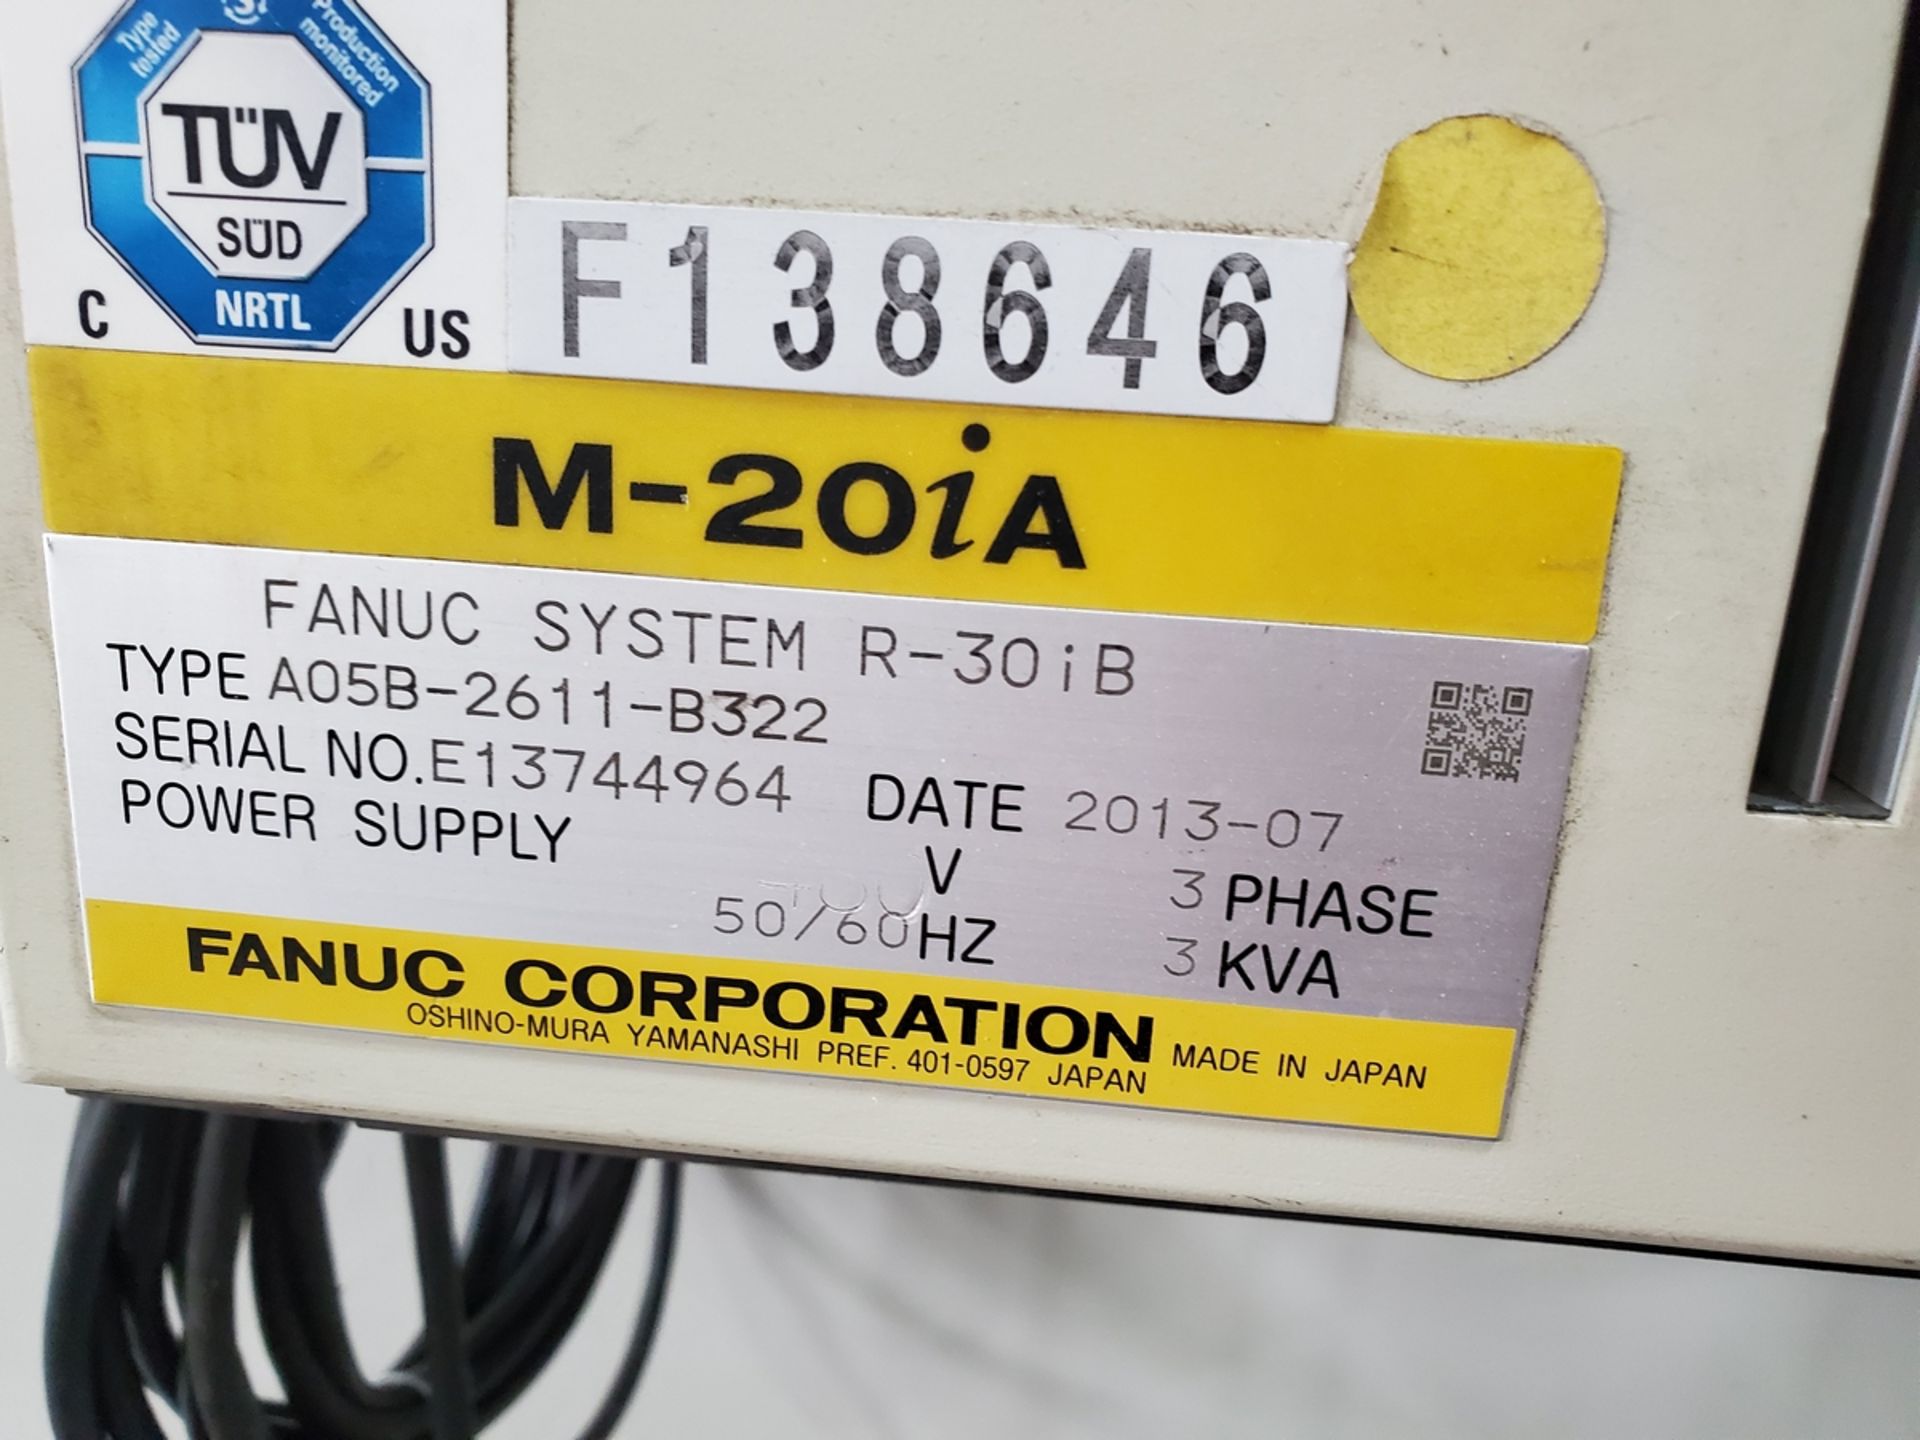 Fanuc M-20iA 6-Axis Robot, New 2013 - Image 10 of 10